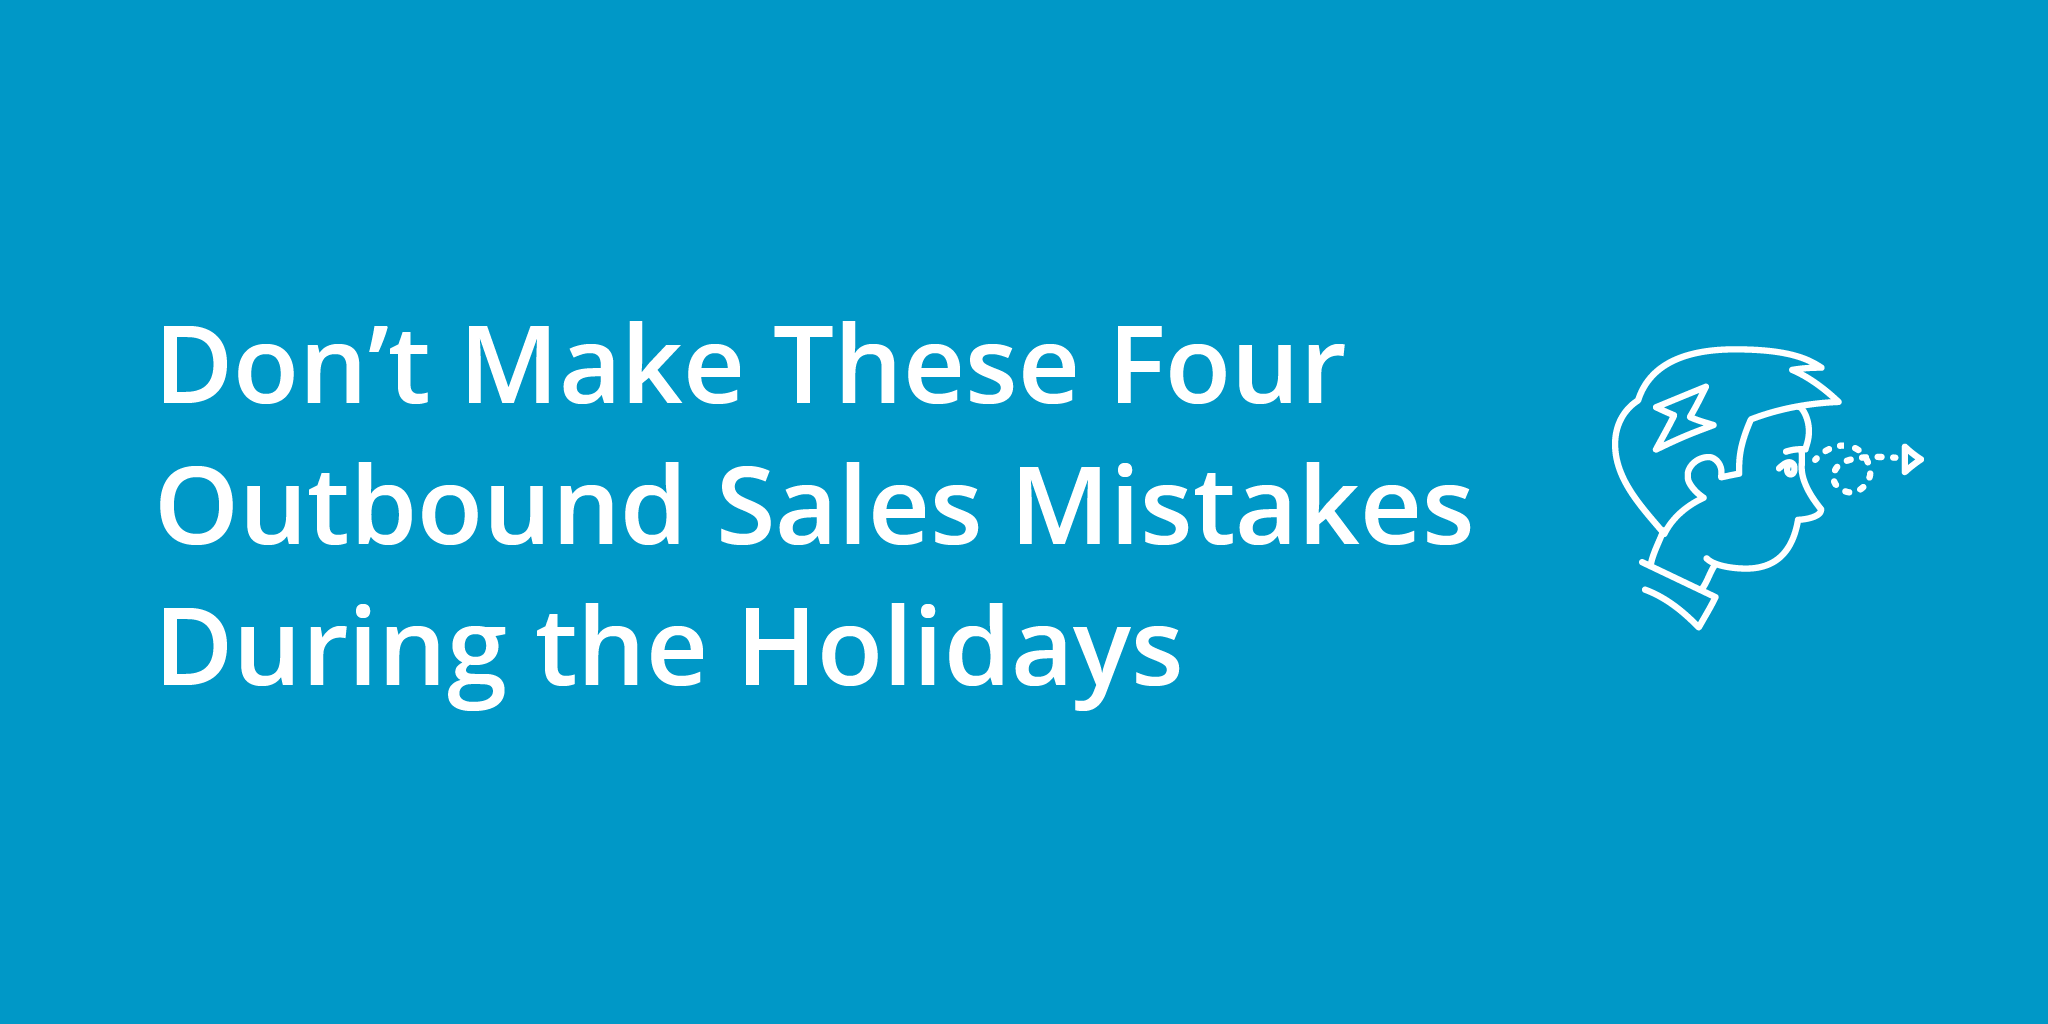 Don’t Make These 4 Outbound Sales Mistakes During the Holidays